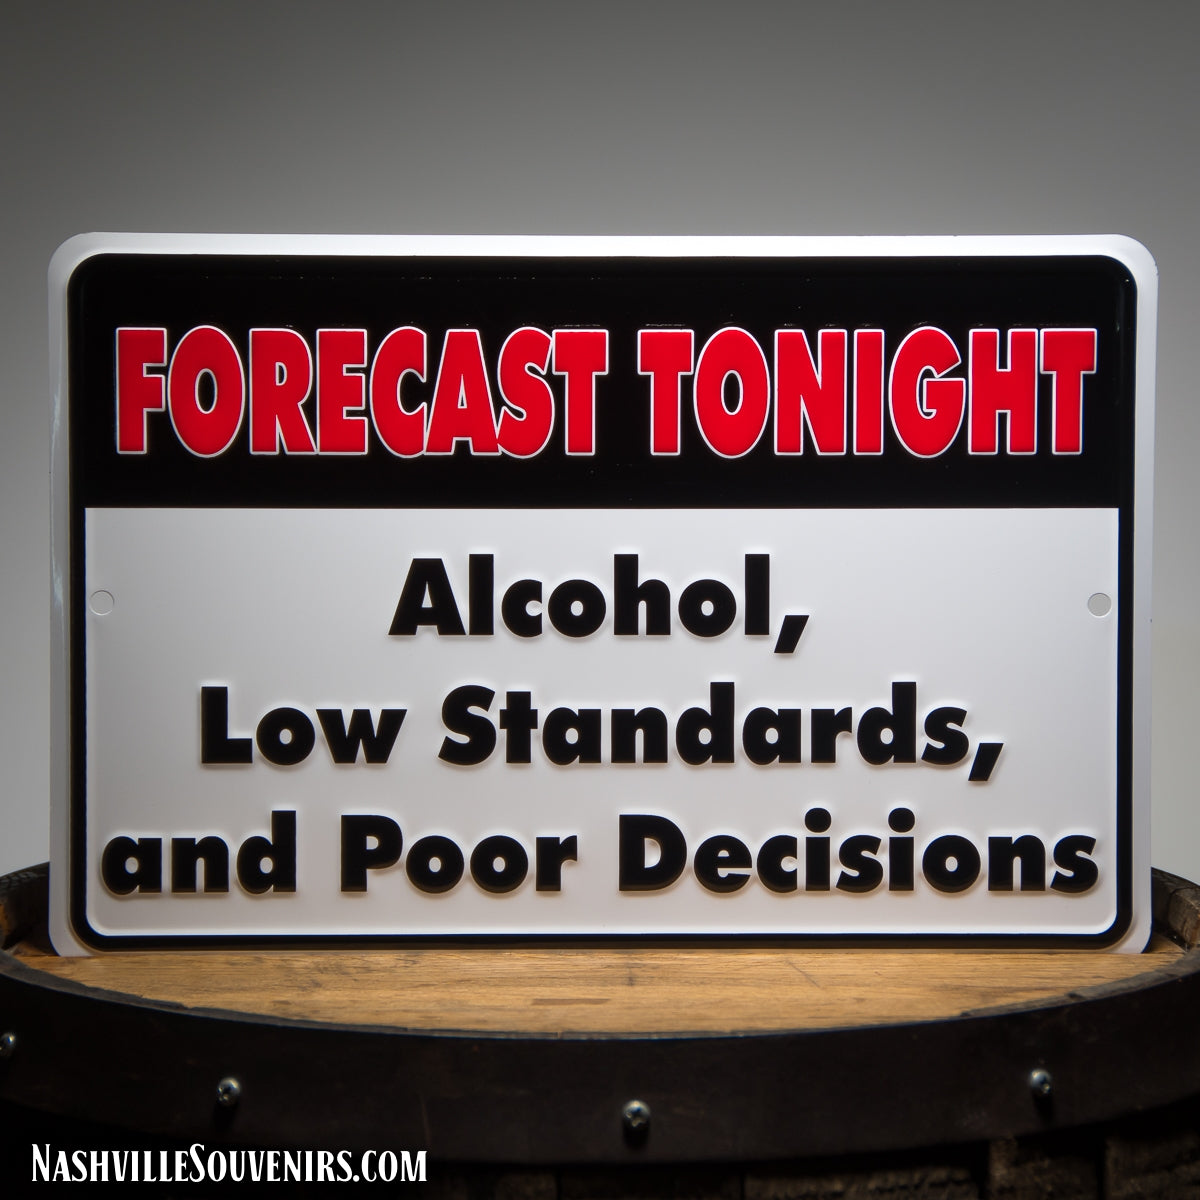 Forecast Tonight Alcohol, Low Standards and Poor Decisions Tin Sign